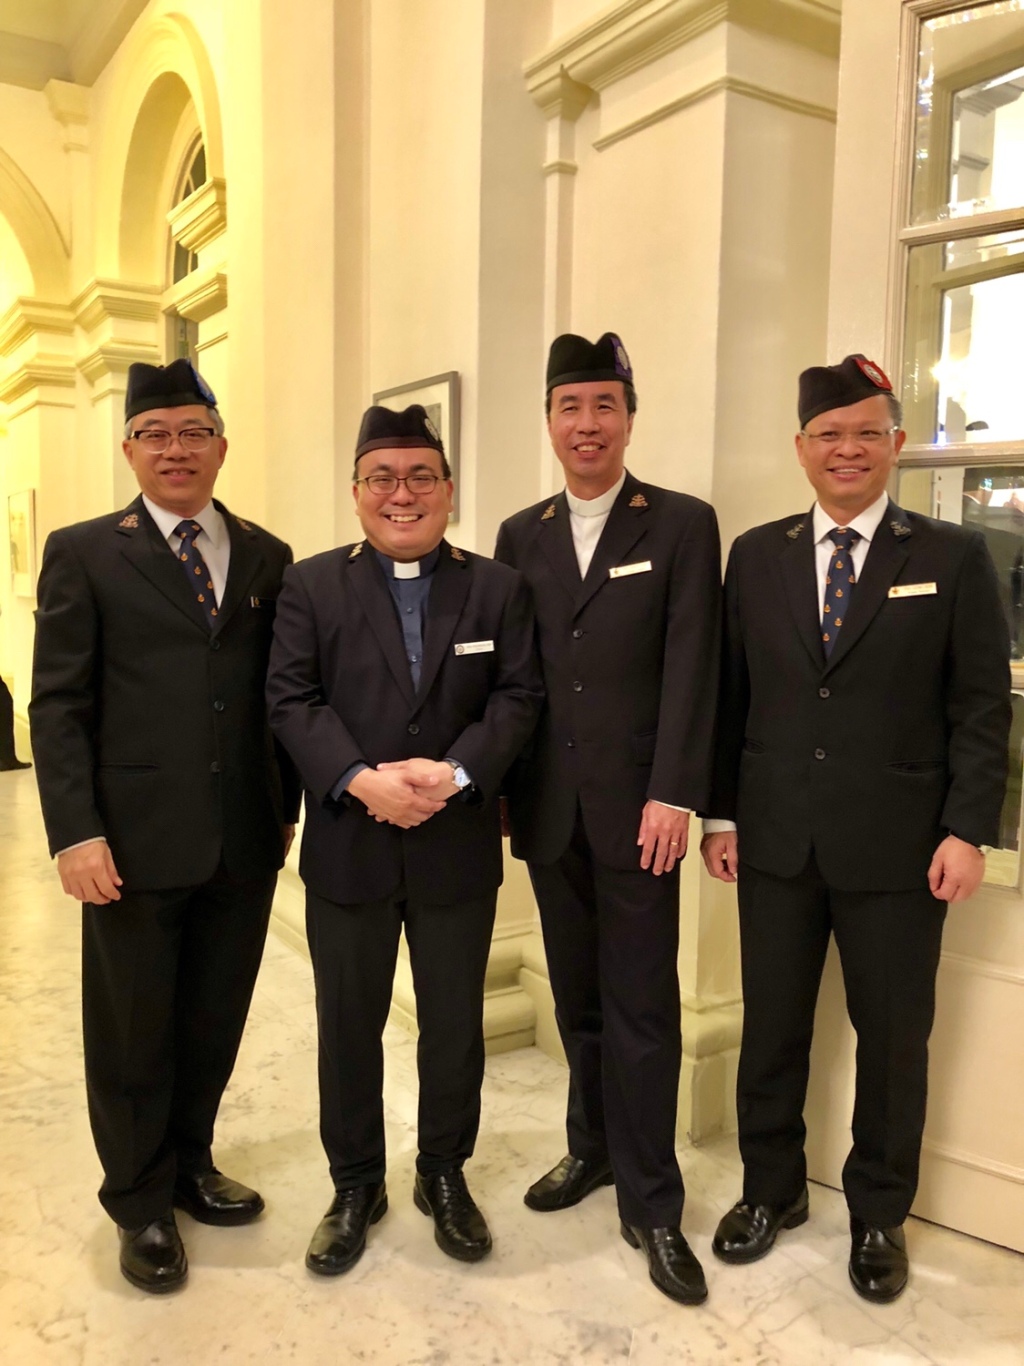 President’s Award for the Boys’ Brigade at the Istana (11 July 2018)